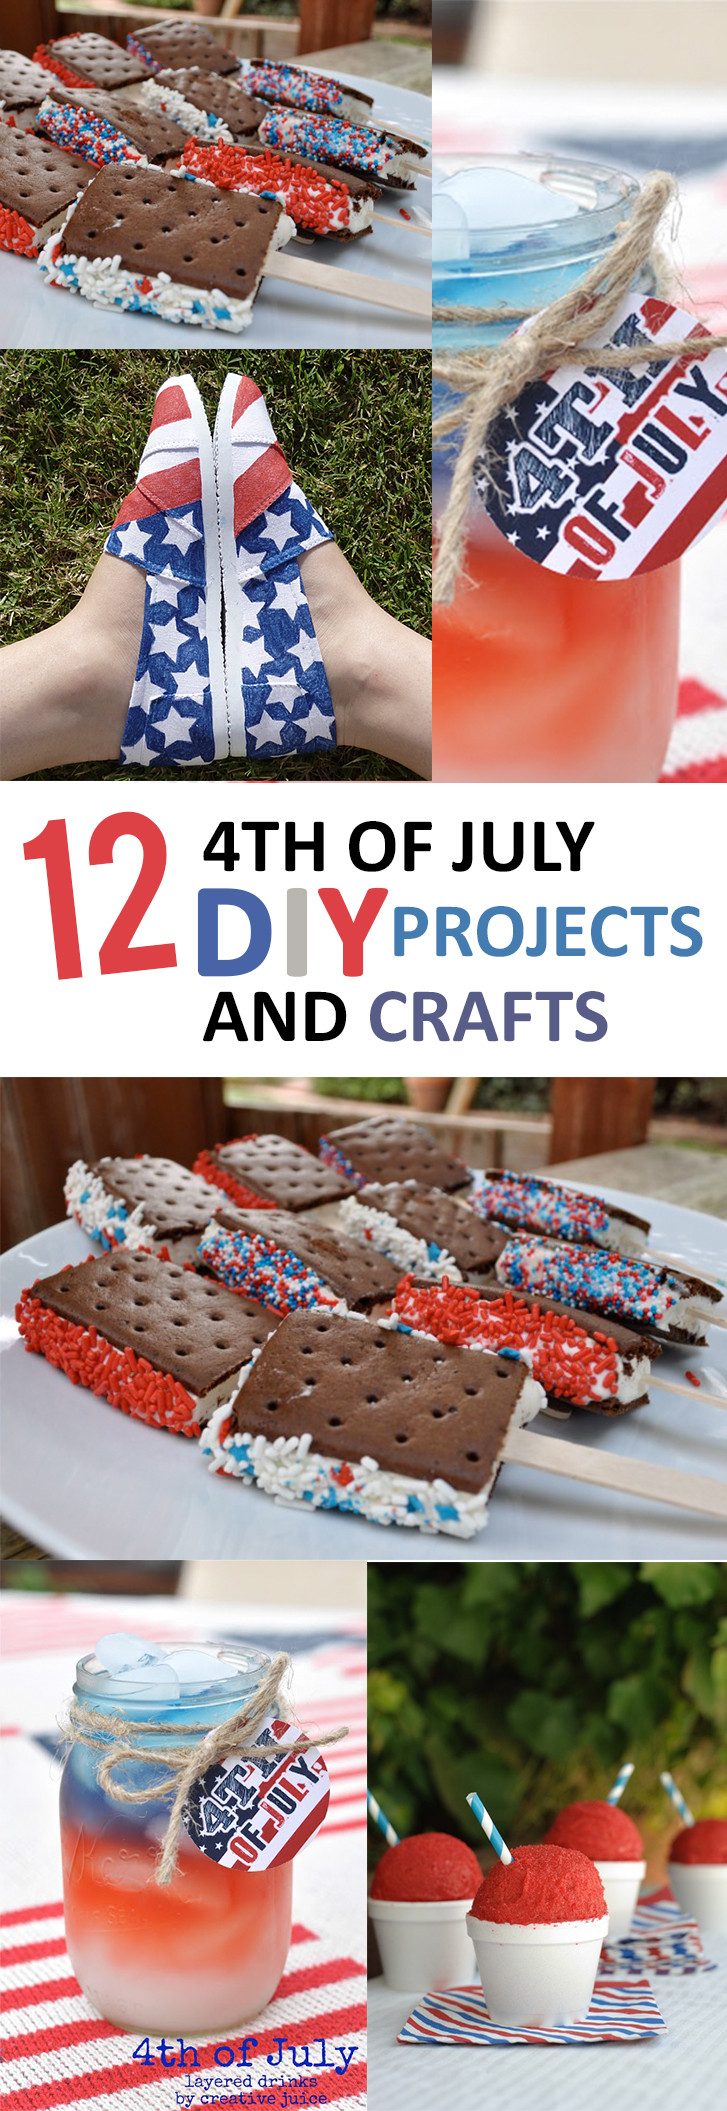 Diy 4th Of July Crafts
 12 4th of July DIY Projects and Crafts